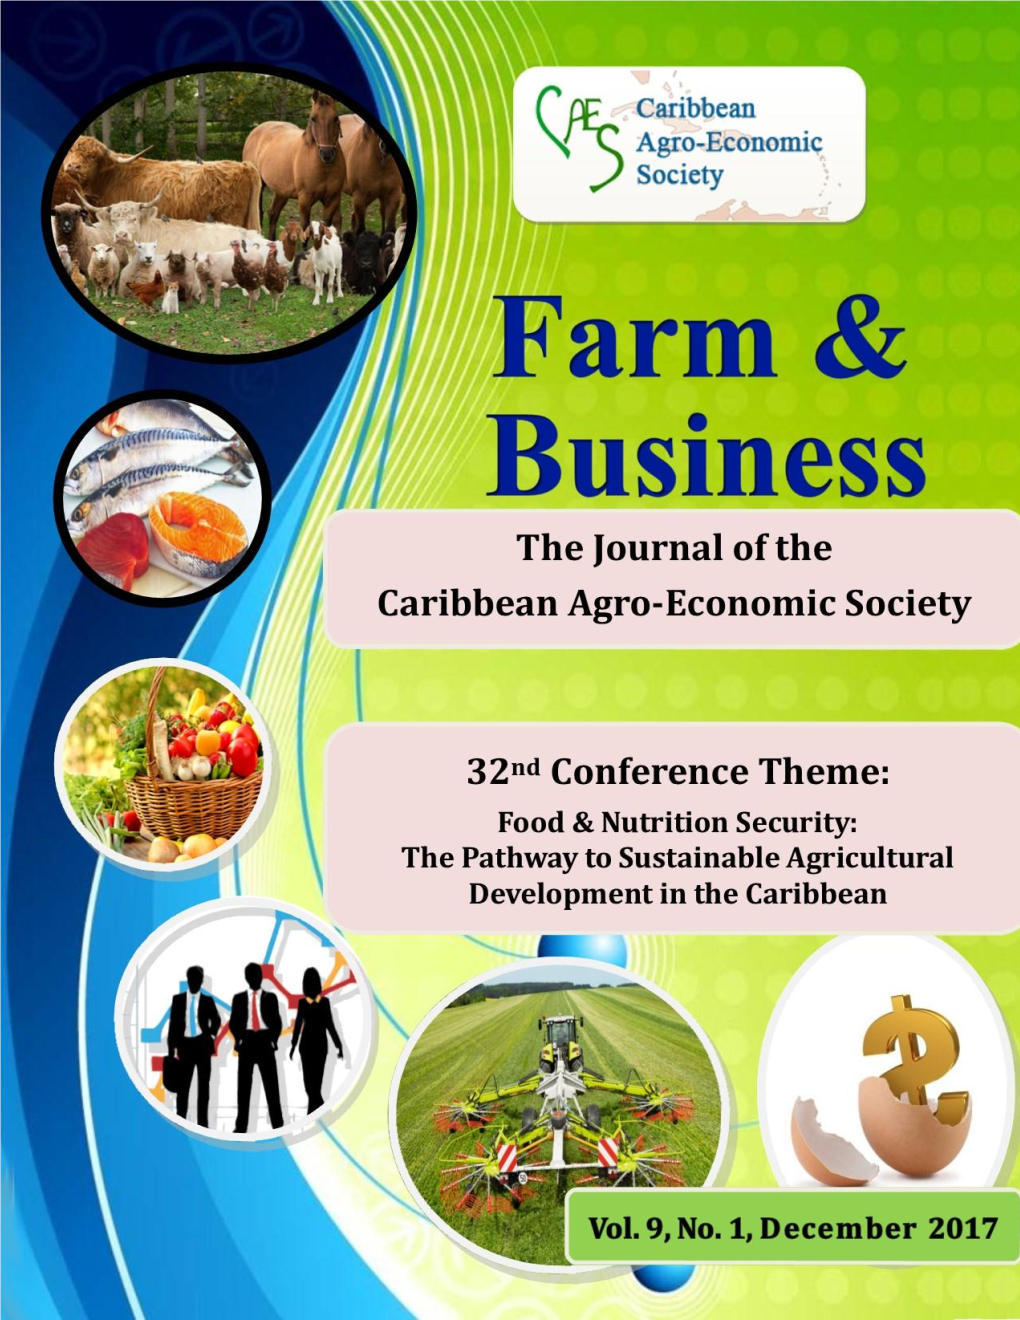 CARLISLE A. PEMBERTON, Department of Agricultural Economics & Extension, Faculty of Food and Agriculture, the University of the West Indies, St